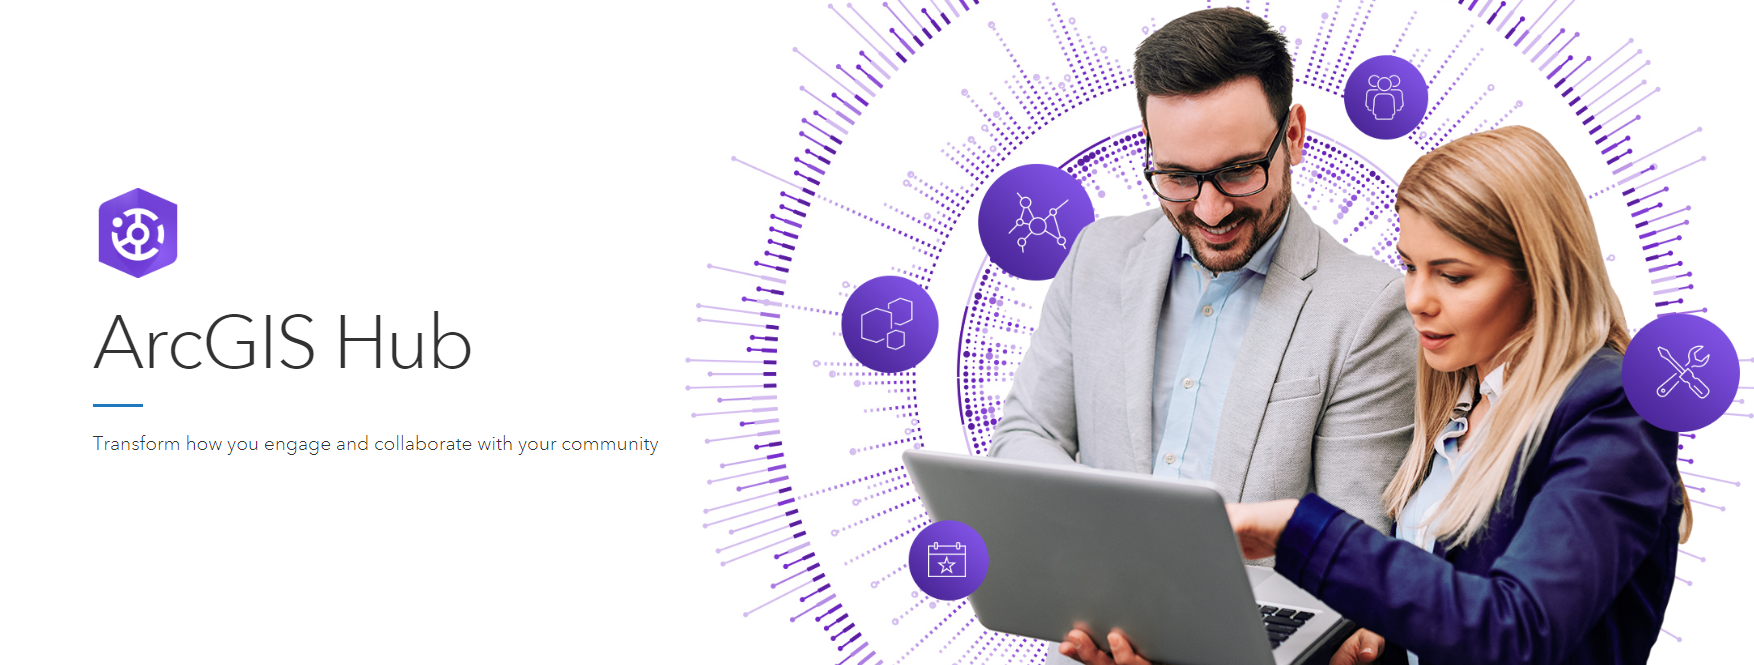 Banner image reading "ArcGIS Hub - Transform how you engage and collaborate with your community" with an image of two people looking at a laptop screen